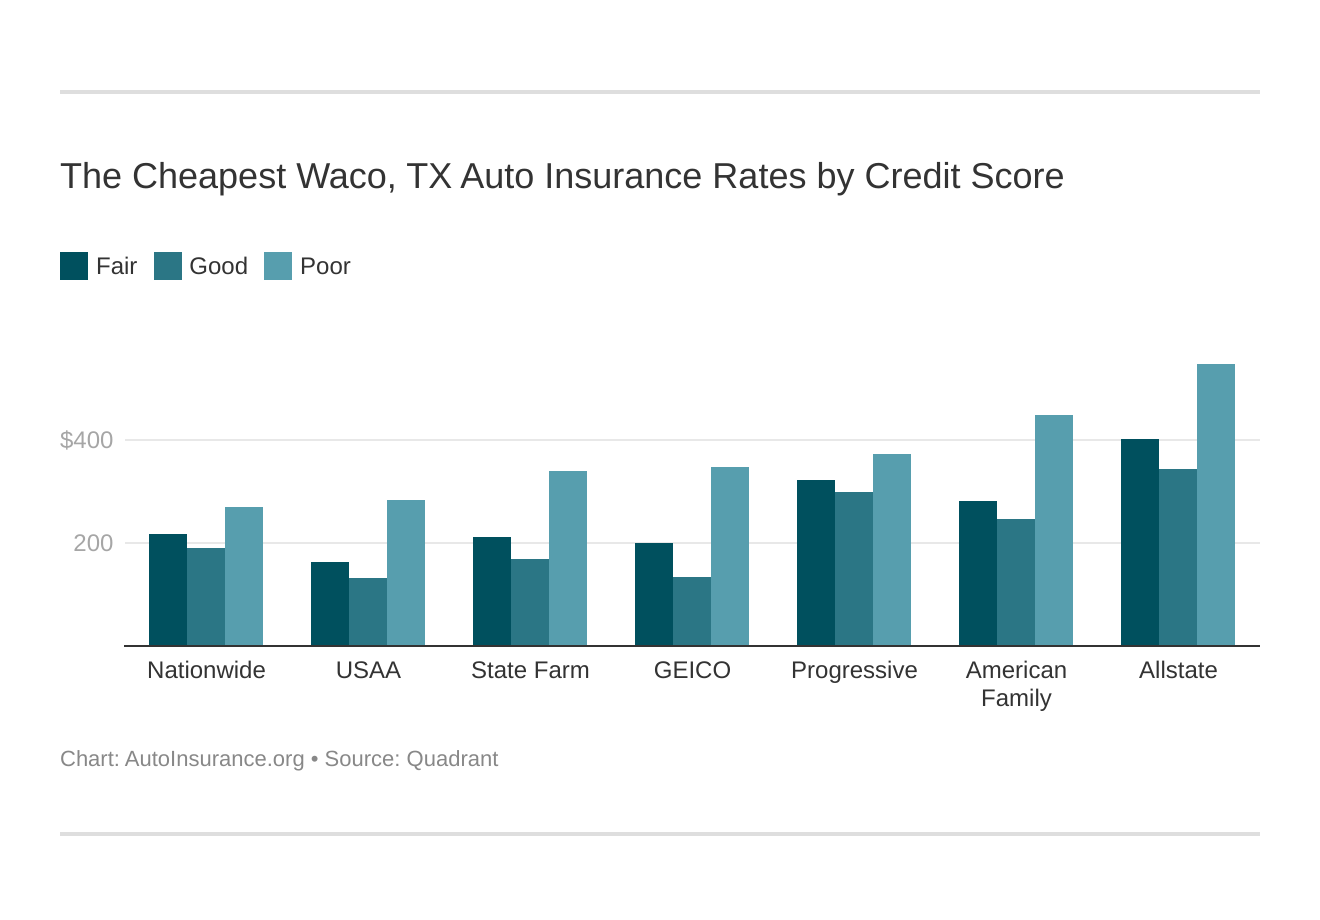 The Cheapest Waco, TX Auto Insurance Rates by Credit Score